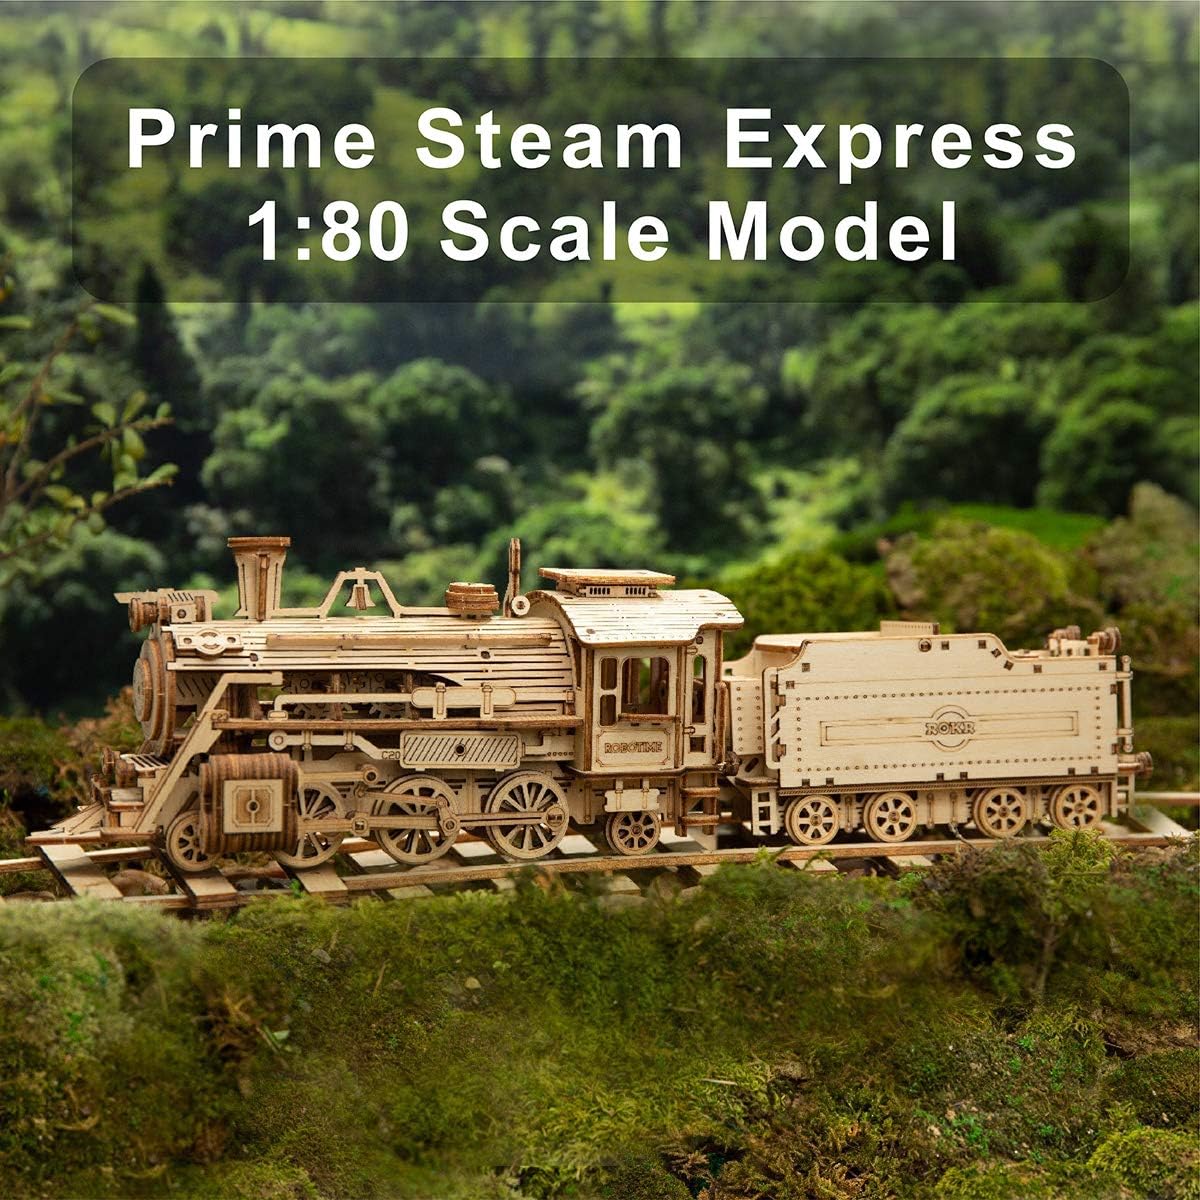 3D Wooden Puzzle for Adults-Mechanical Train Model Kits-Brain Teaser Puzzles-Vehicle Building Kits-Unique Gift for Kids on Birthday/Chris as Day(1:80 Scale)(MC501-Prime Steam Express)